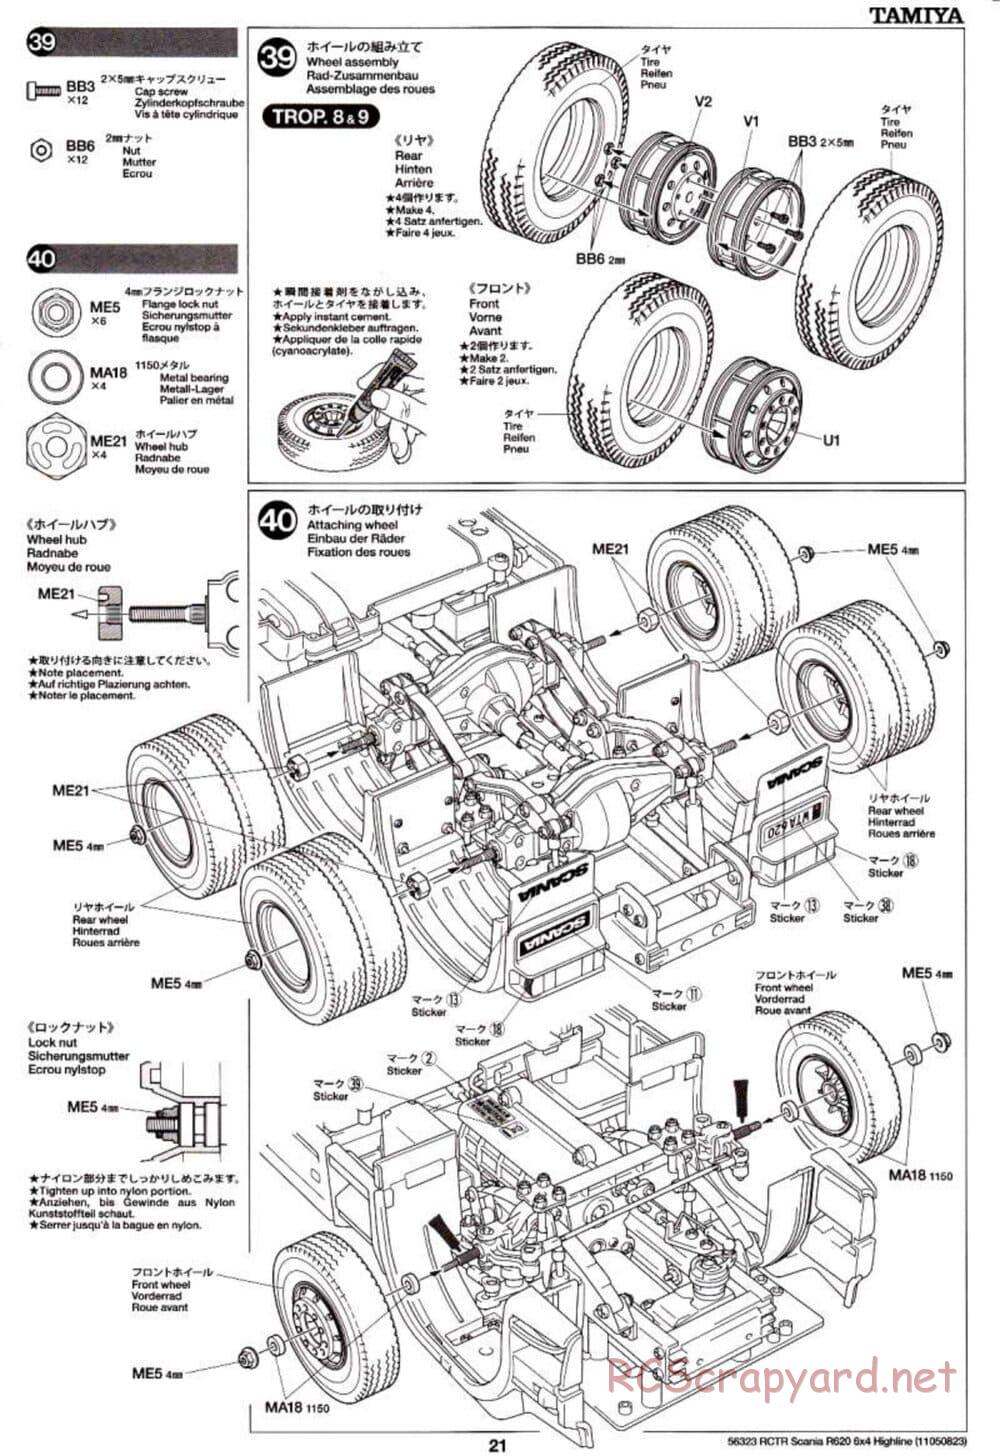 Tamiya - Scania R620 6x4 Highline Tractor Truck Chassis - Manual - Page 21